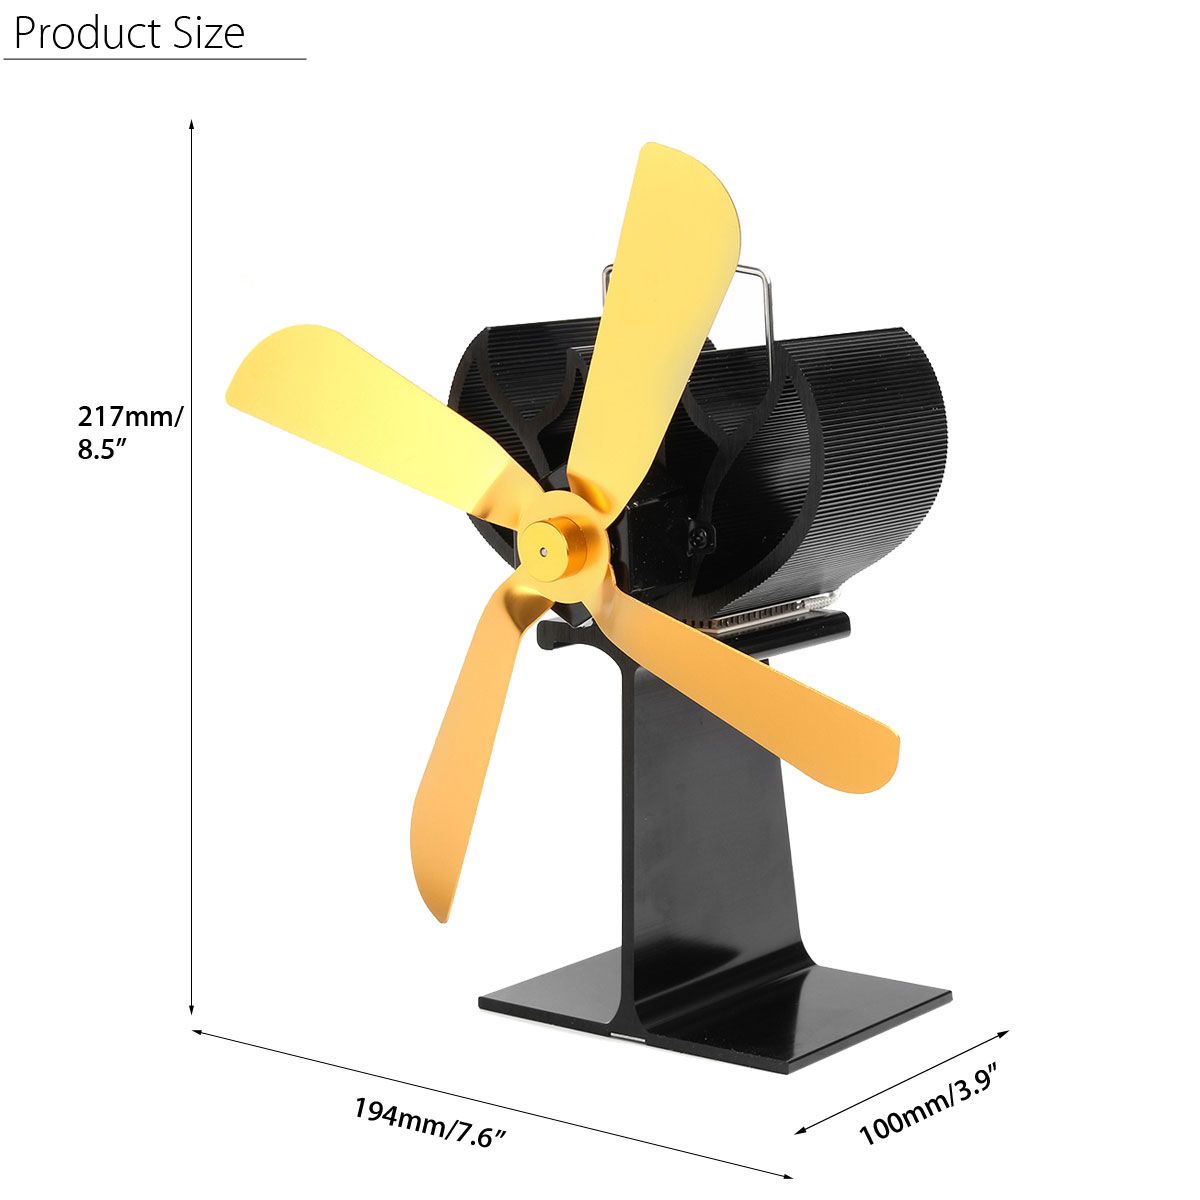 4-Blades-Fuel-Saving-Heat-Powered-Stove-Fan-For-Wood-Burner-Fireplace-Eco-Friendly-1246465